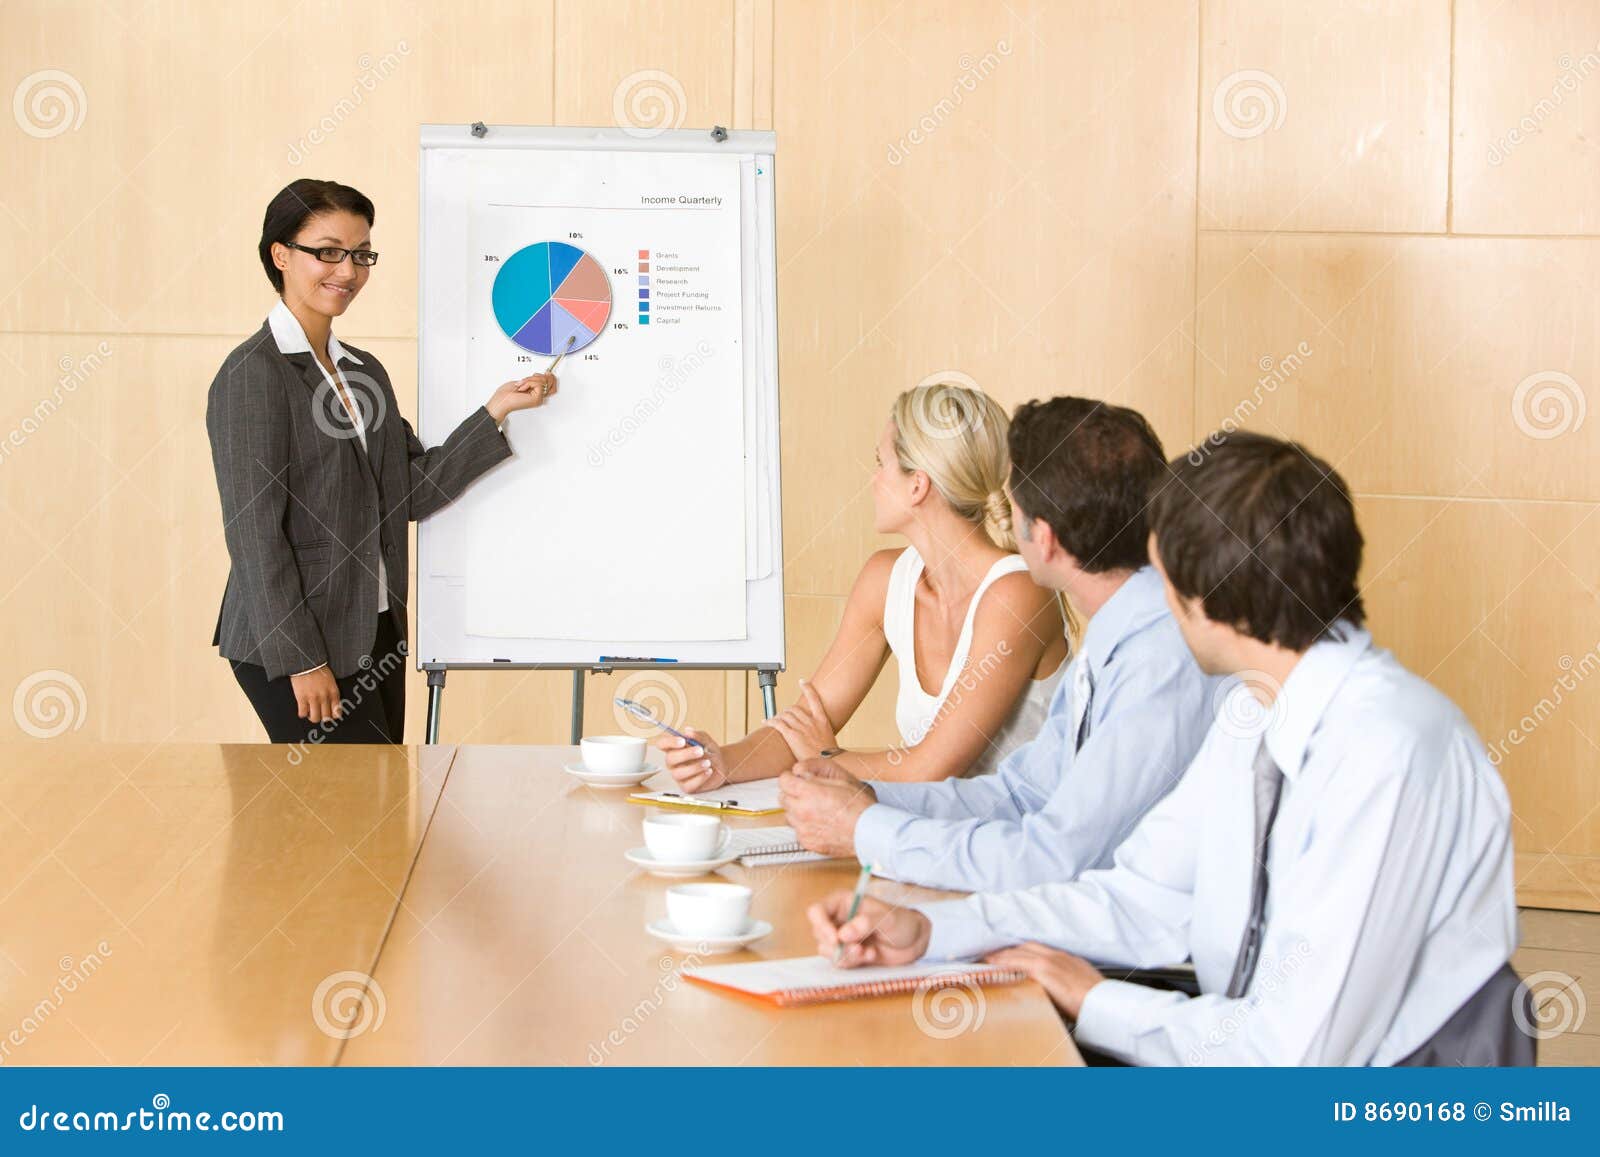 Business Presentation Stock Photos and Images